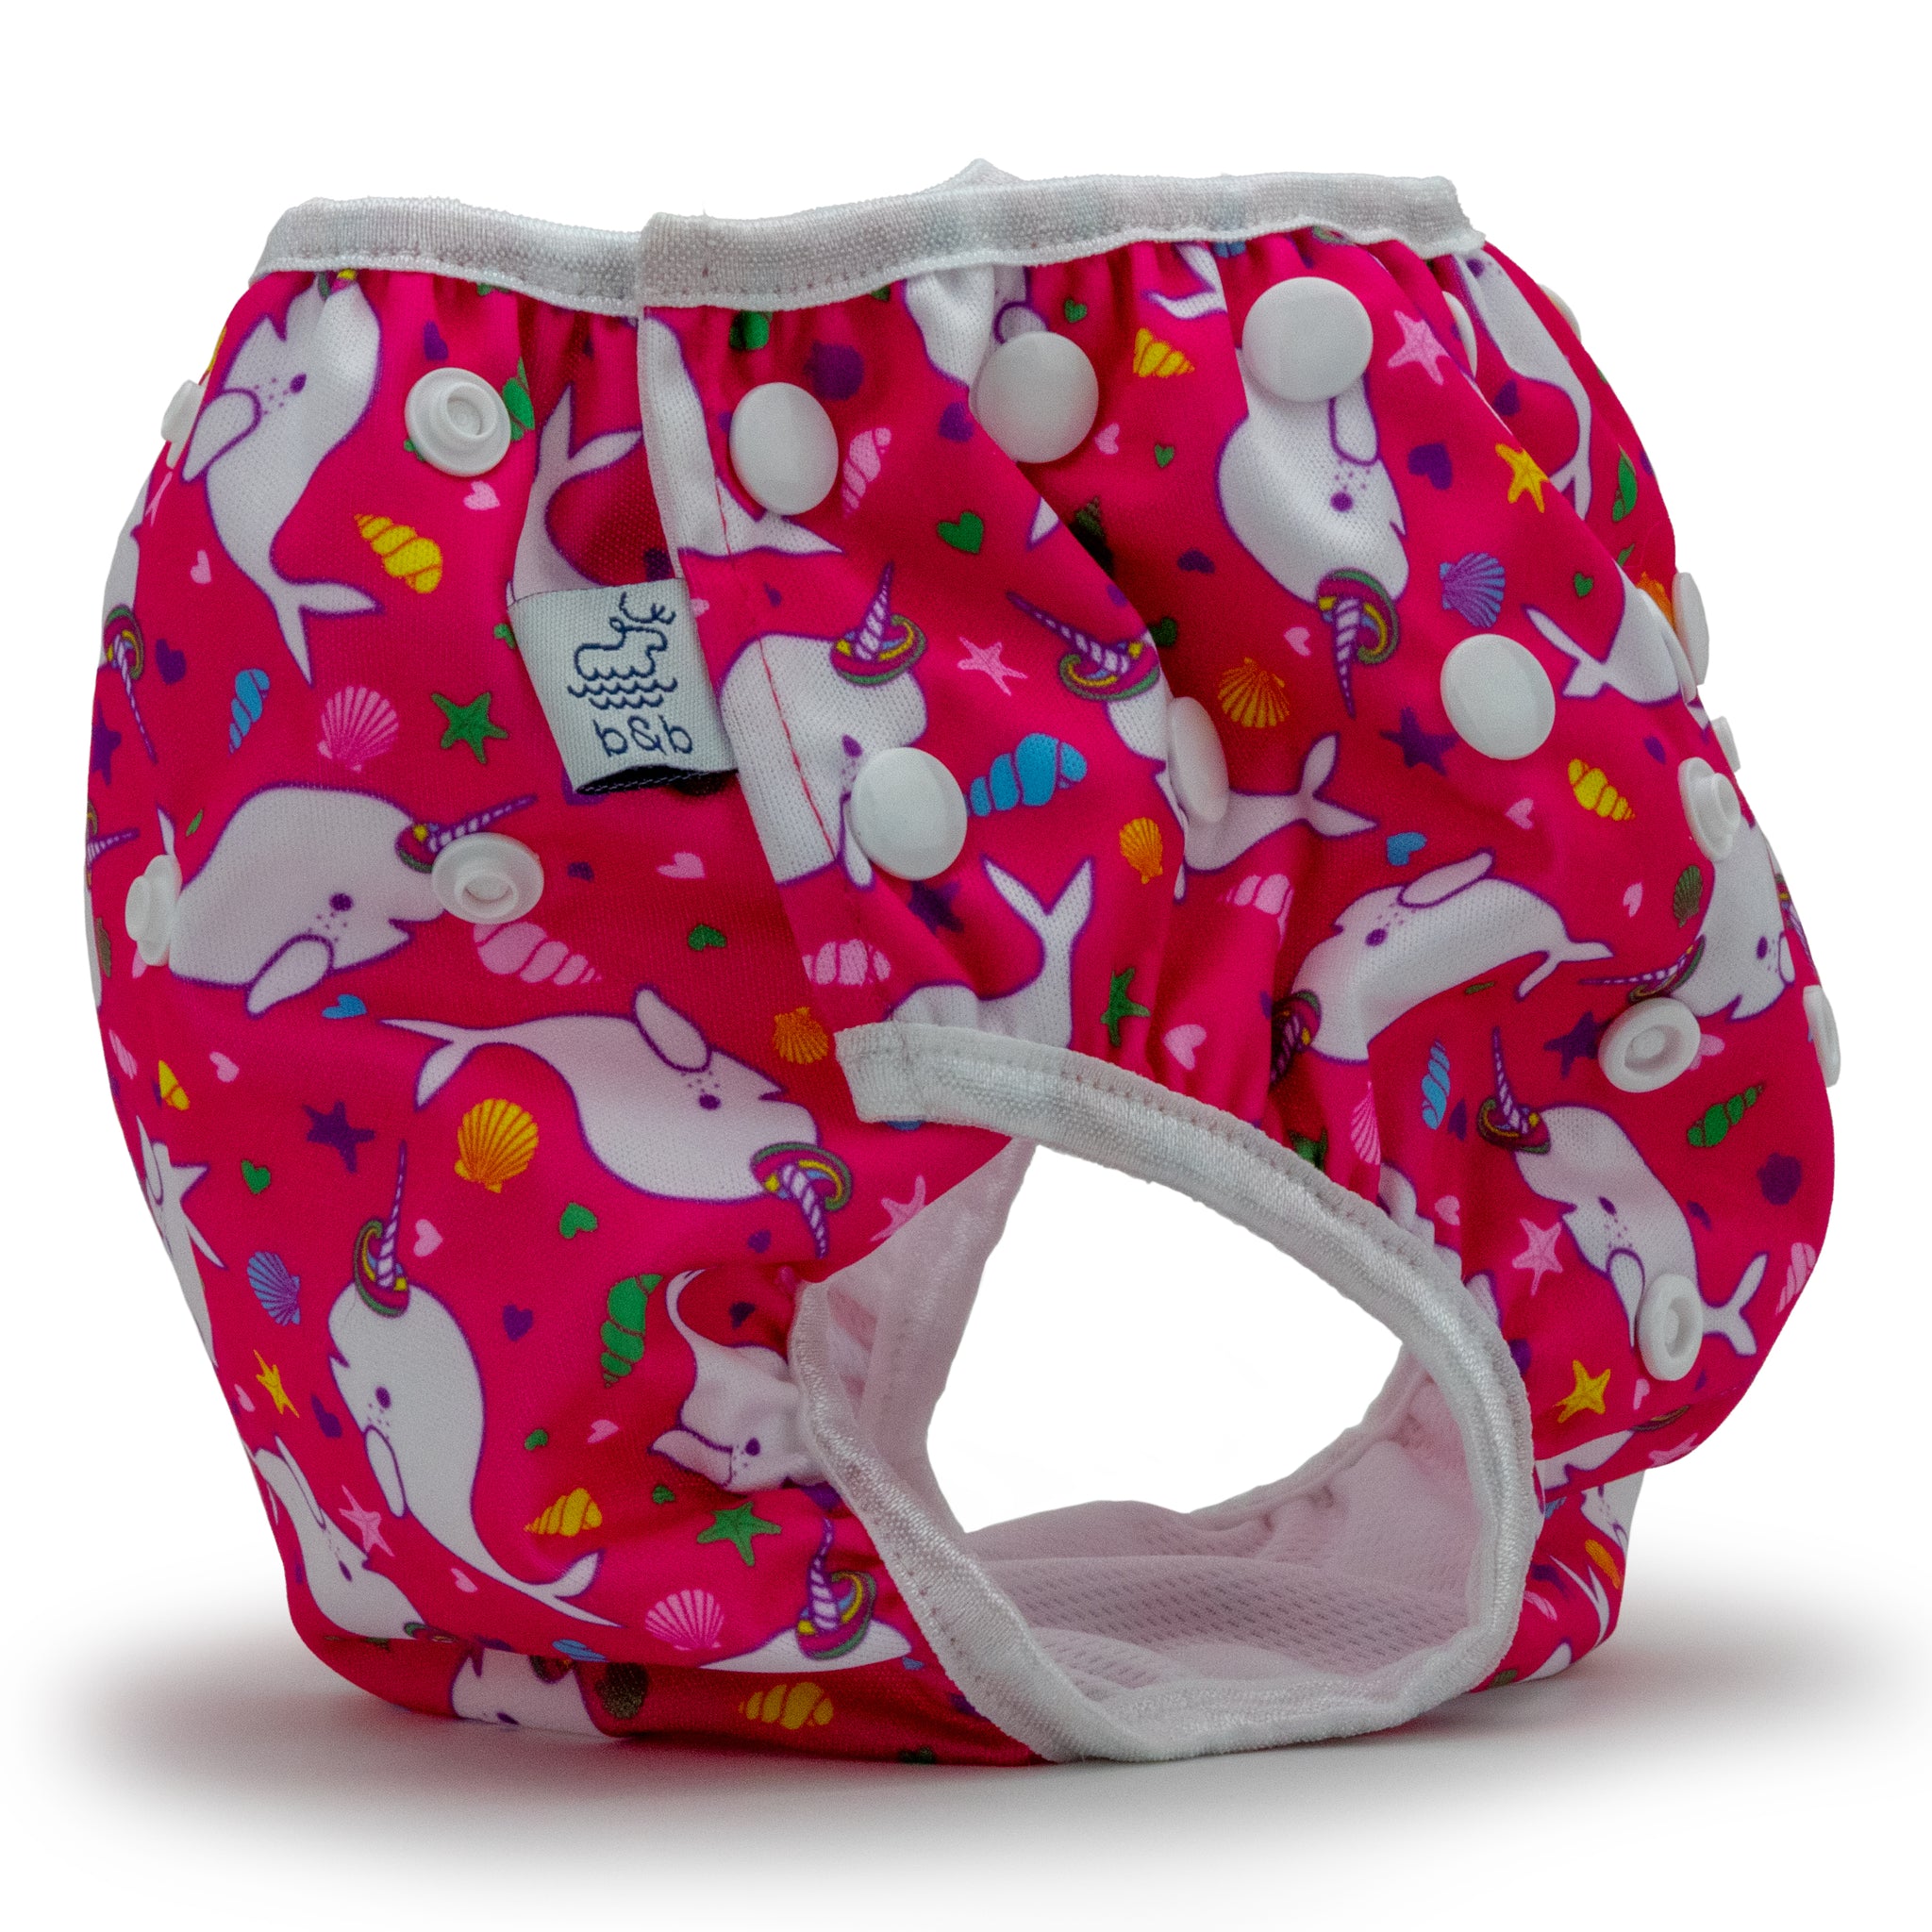 Reusable swim diaper with hot pink narhwal design, side view, large size.